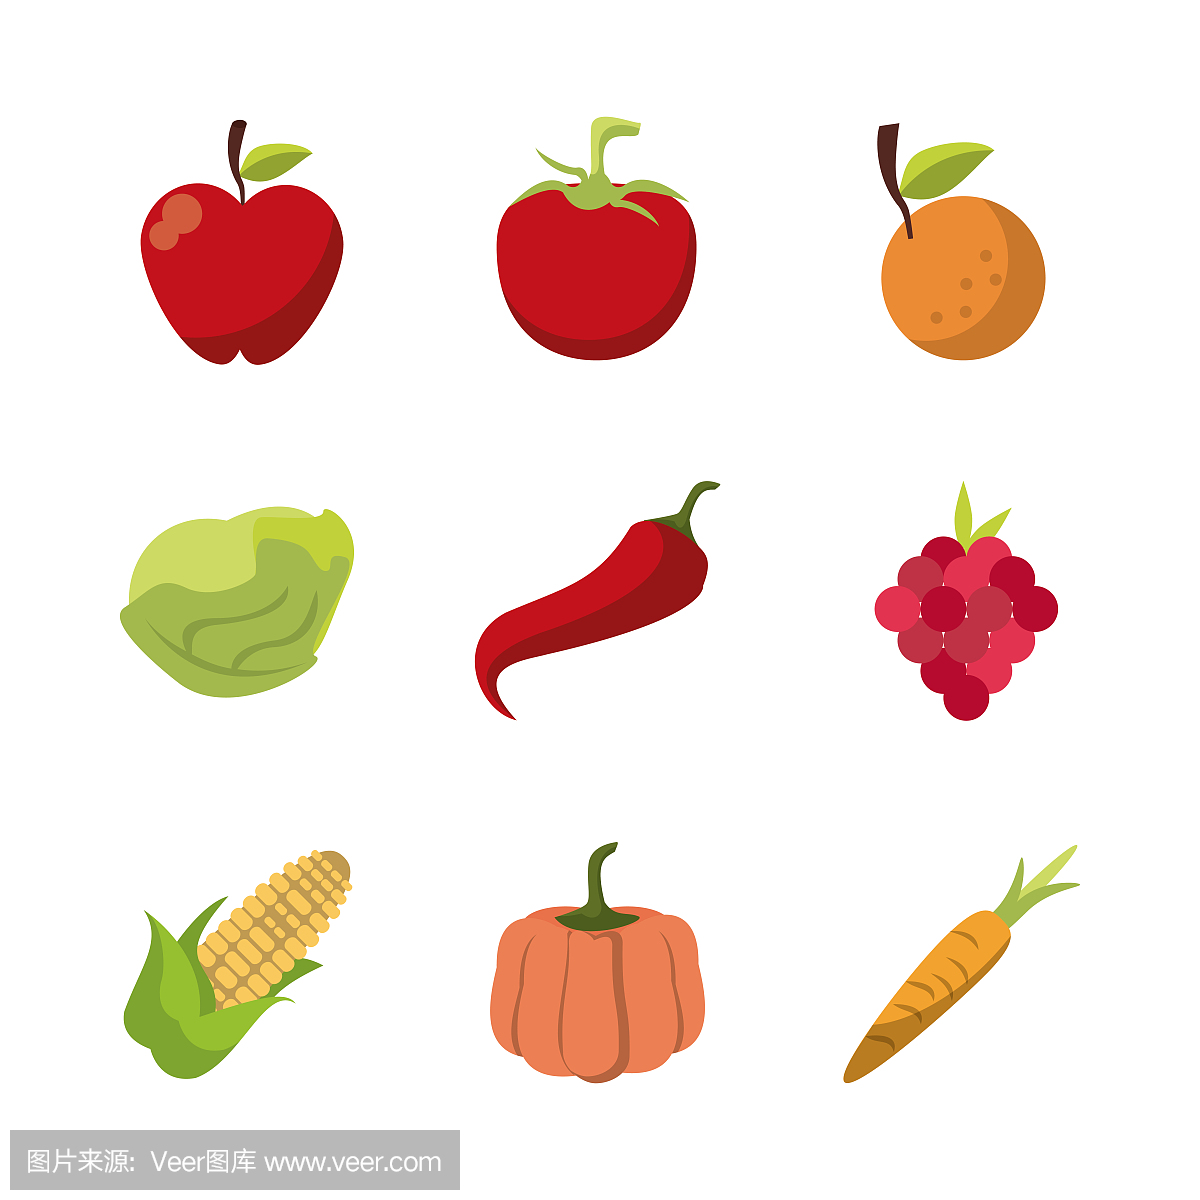 Groceries icons set